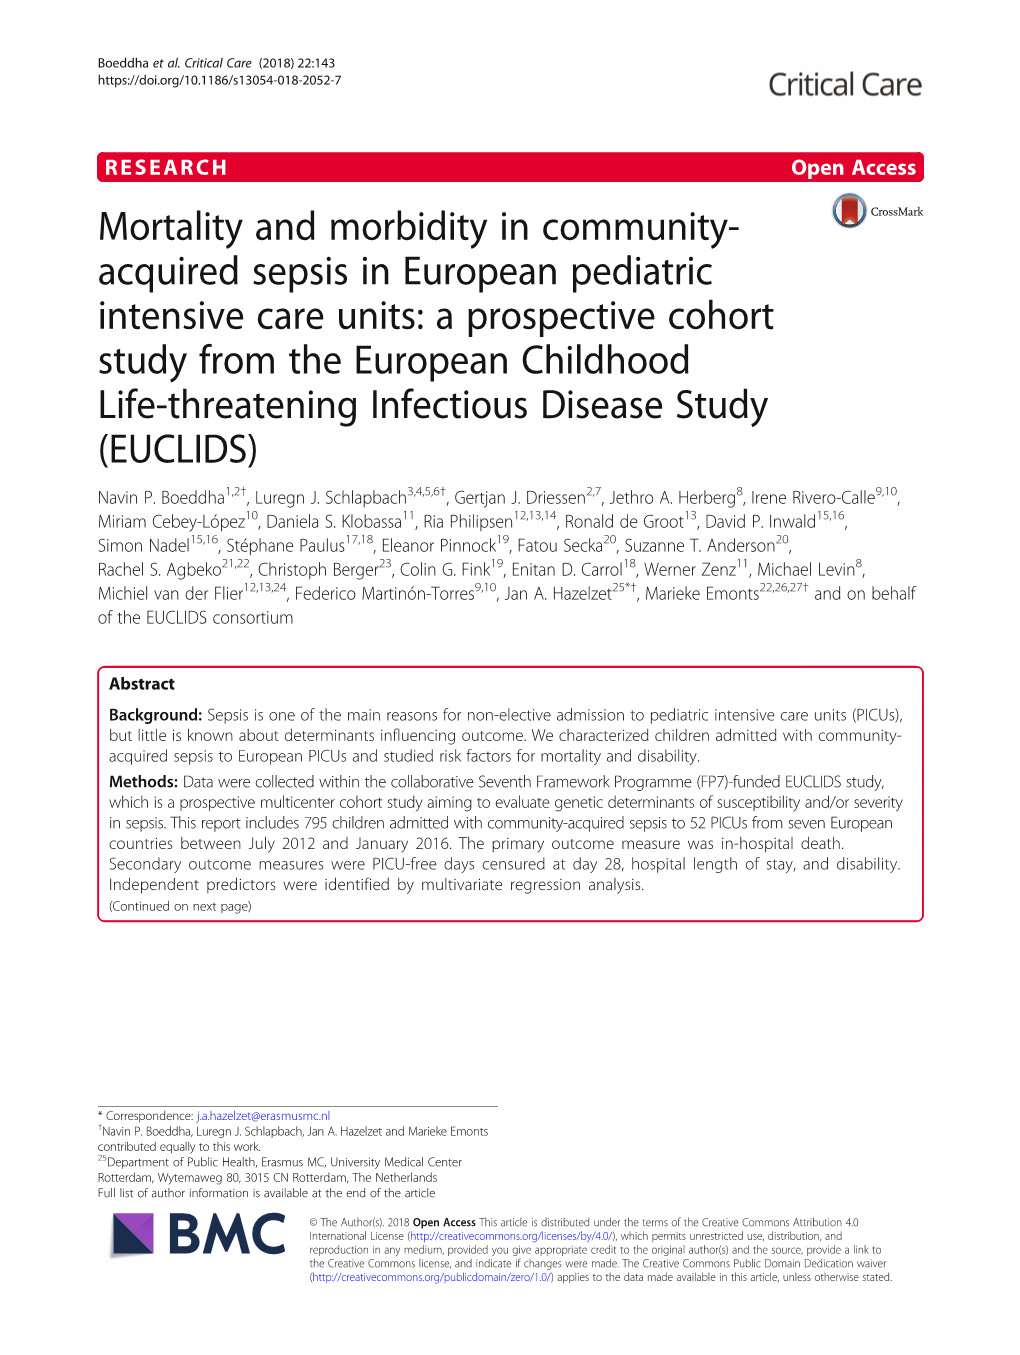 Mortality and Morbidity in Community-Acquired Sepsis In